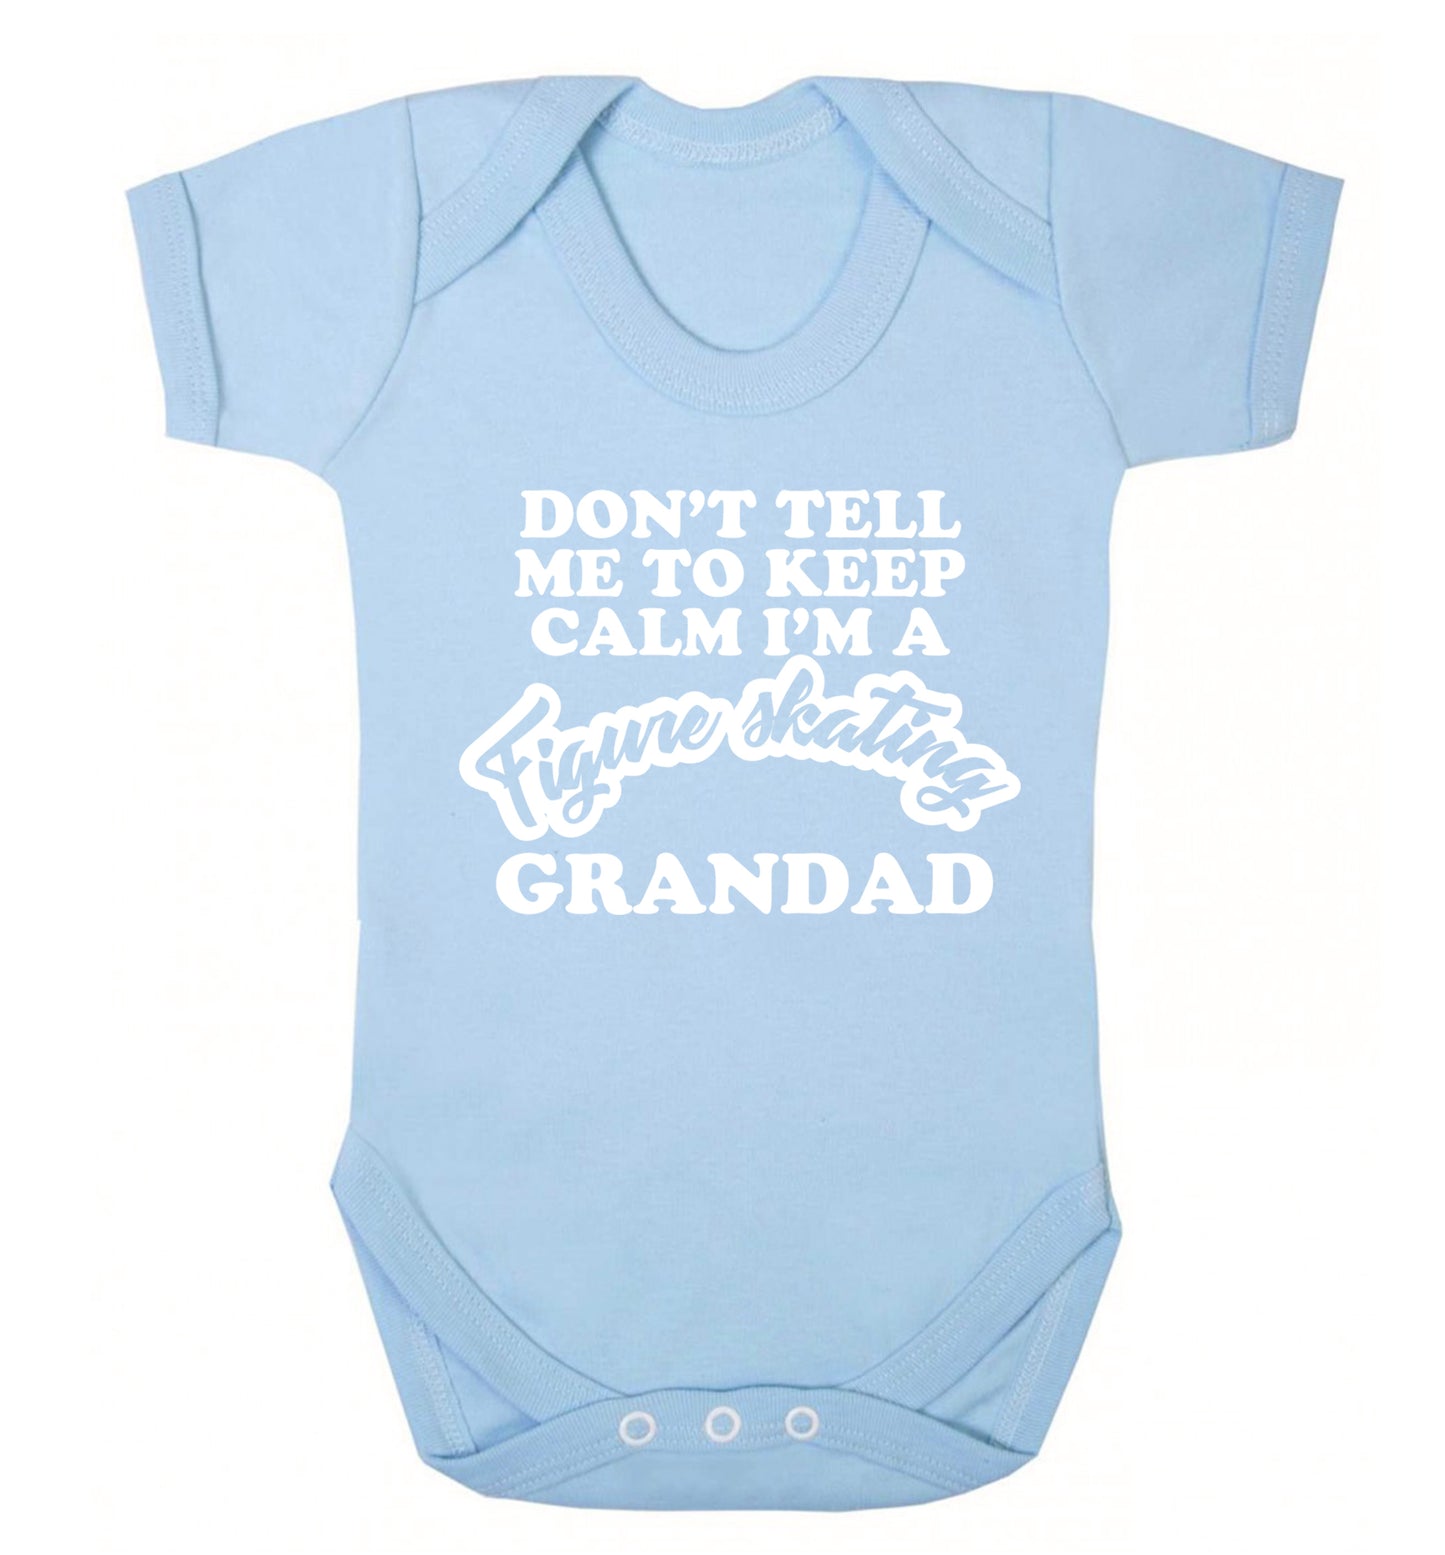 Don't tell me to keep calm I'm a figure skating grandad Baby Vest pale blue 18-24 months